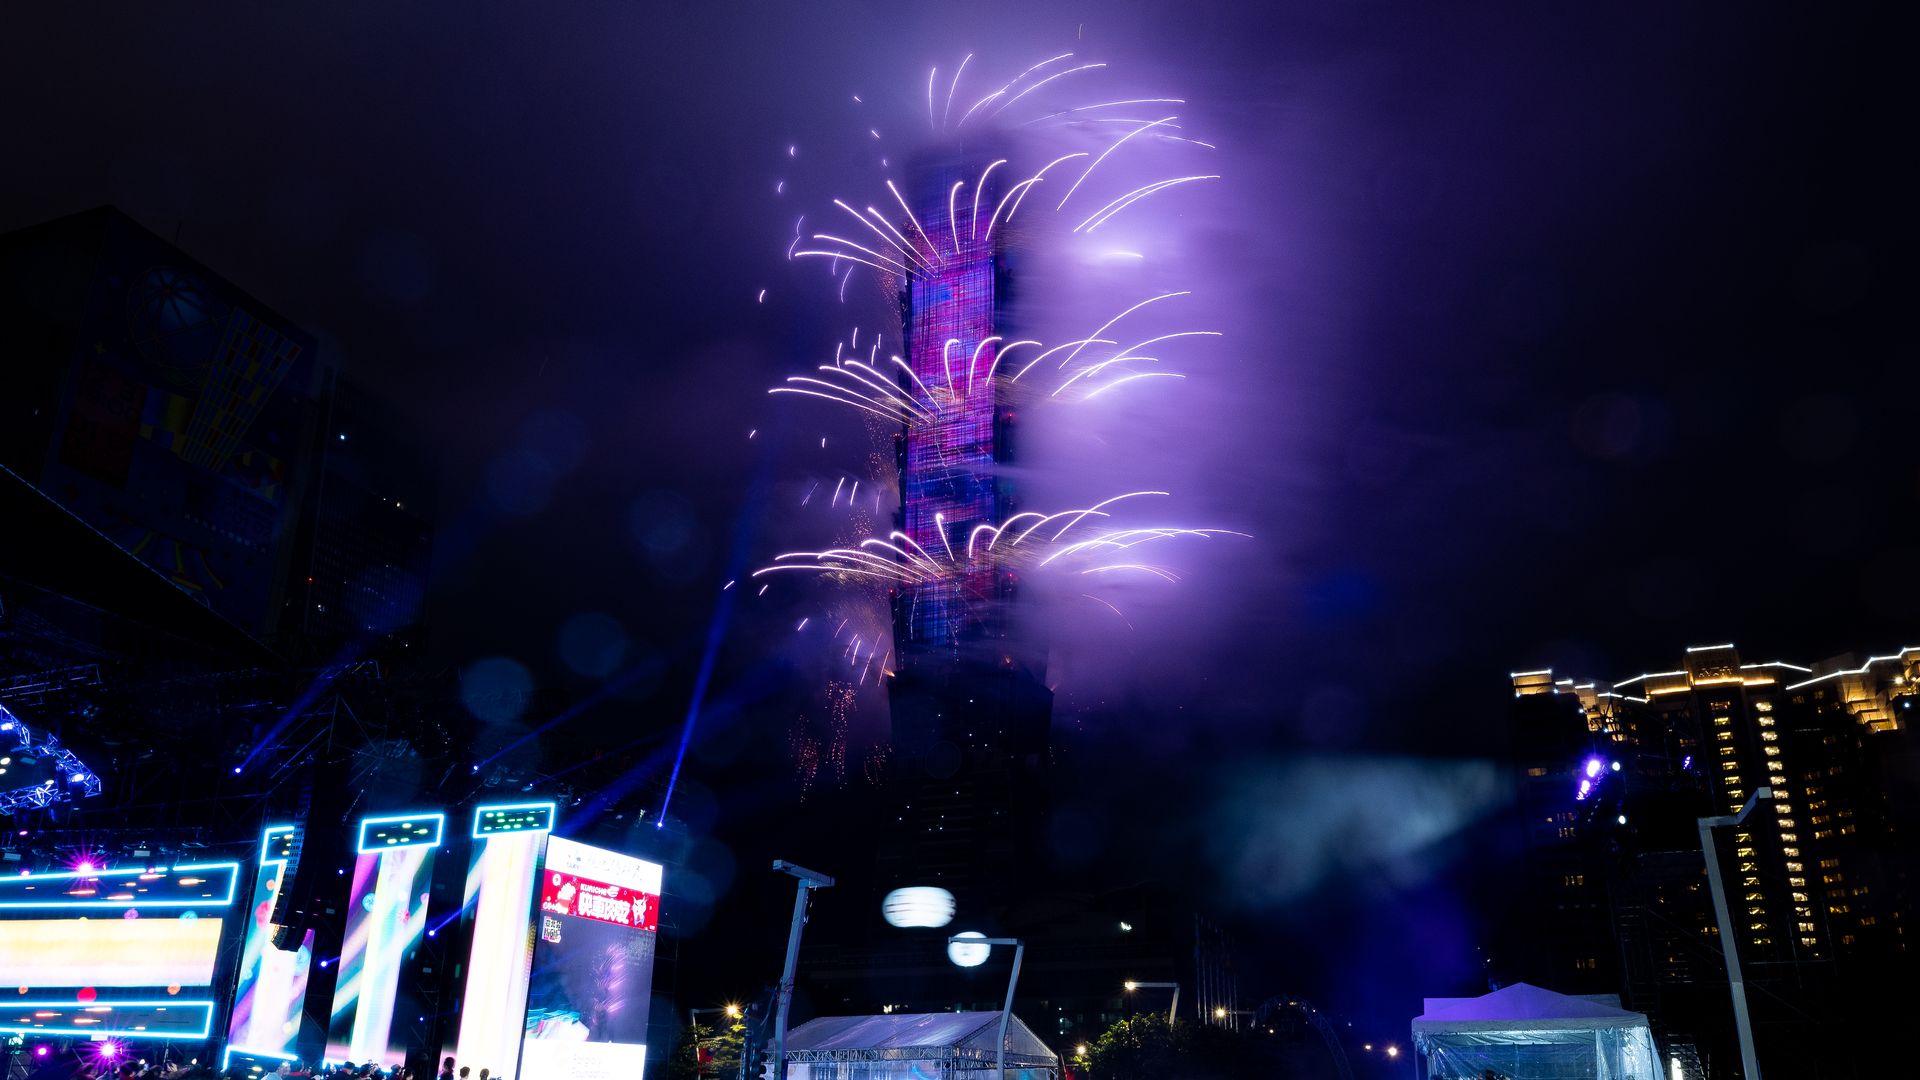 People celebrate as fireworks light up the skyline from the Taipei 101 building during New Year's celebrations on January 01, 2023 in Taipei, Taiwan. (Photo by Gene Wang/Getty Images)